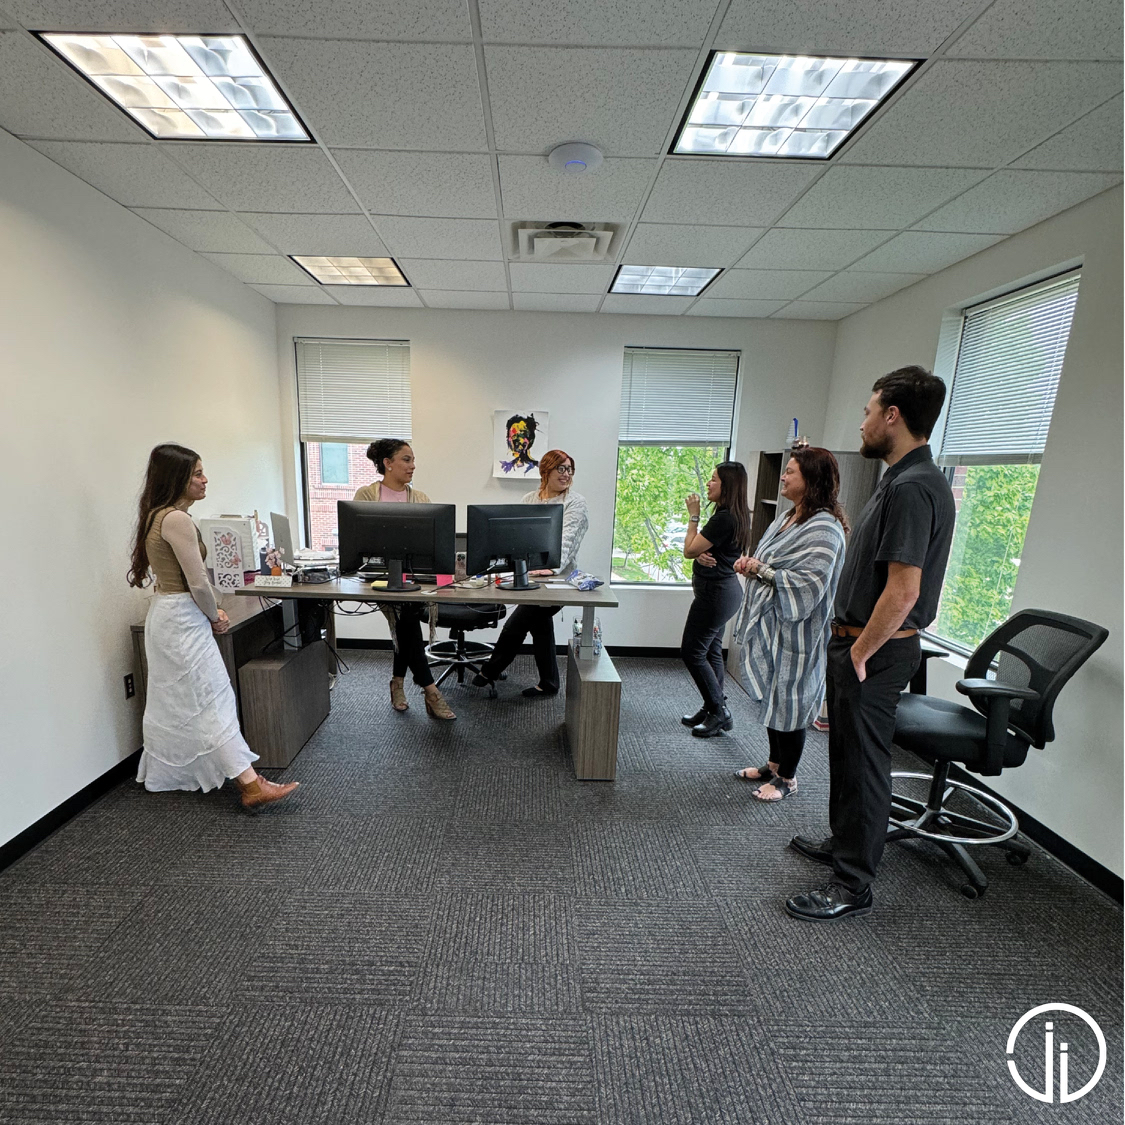 Behind the scenes at Jaffery Insurance: Our incredible service team is on a mission to elevate your experience! 

From brainstorming innovative solutions to refining our approach, they’re dedicated to being the best in the industry.